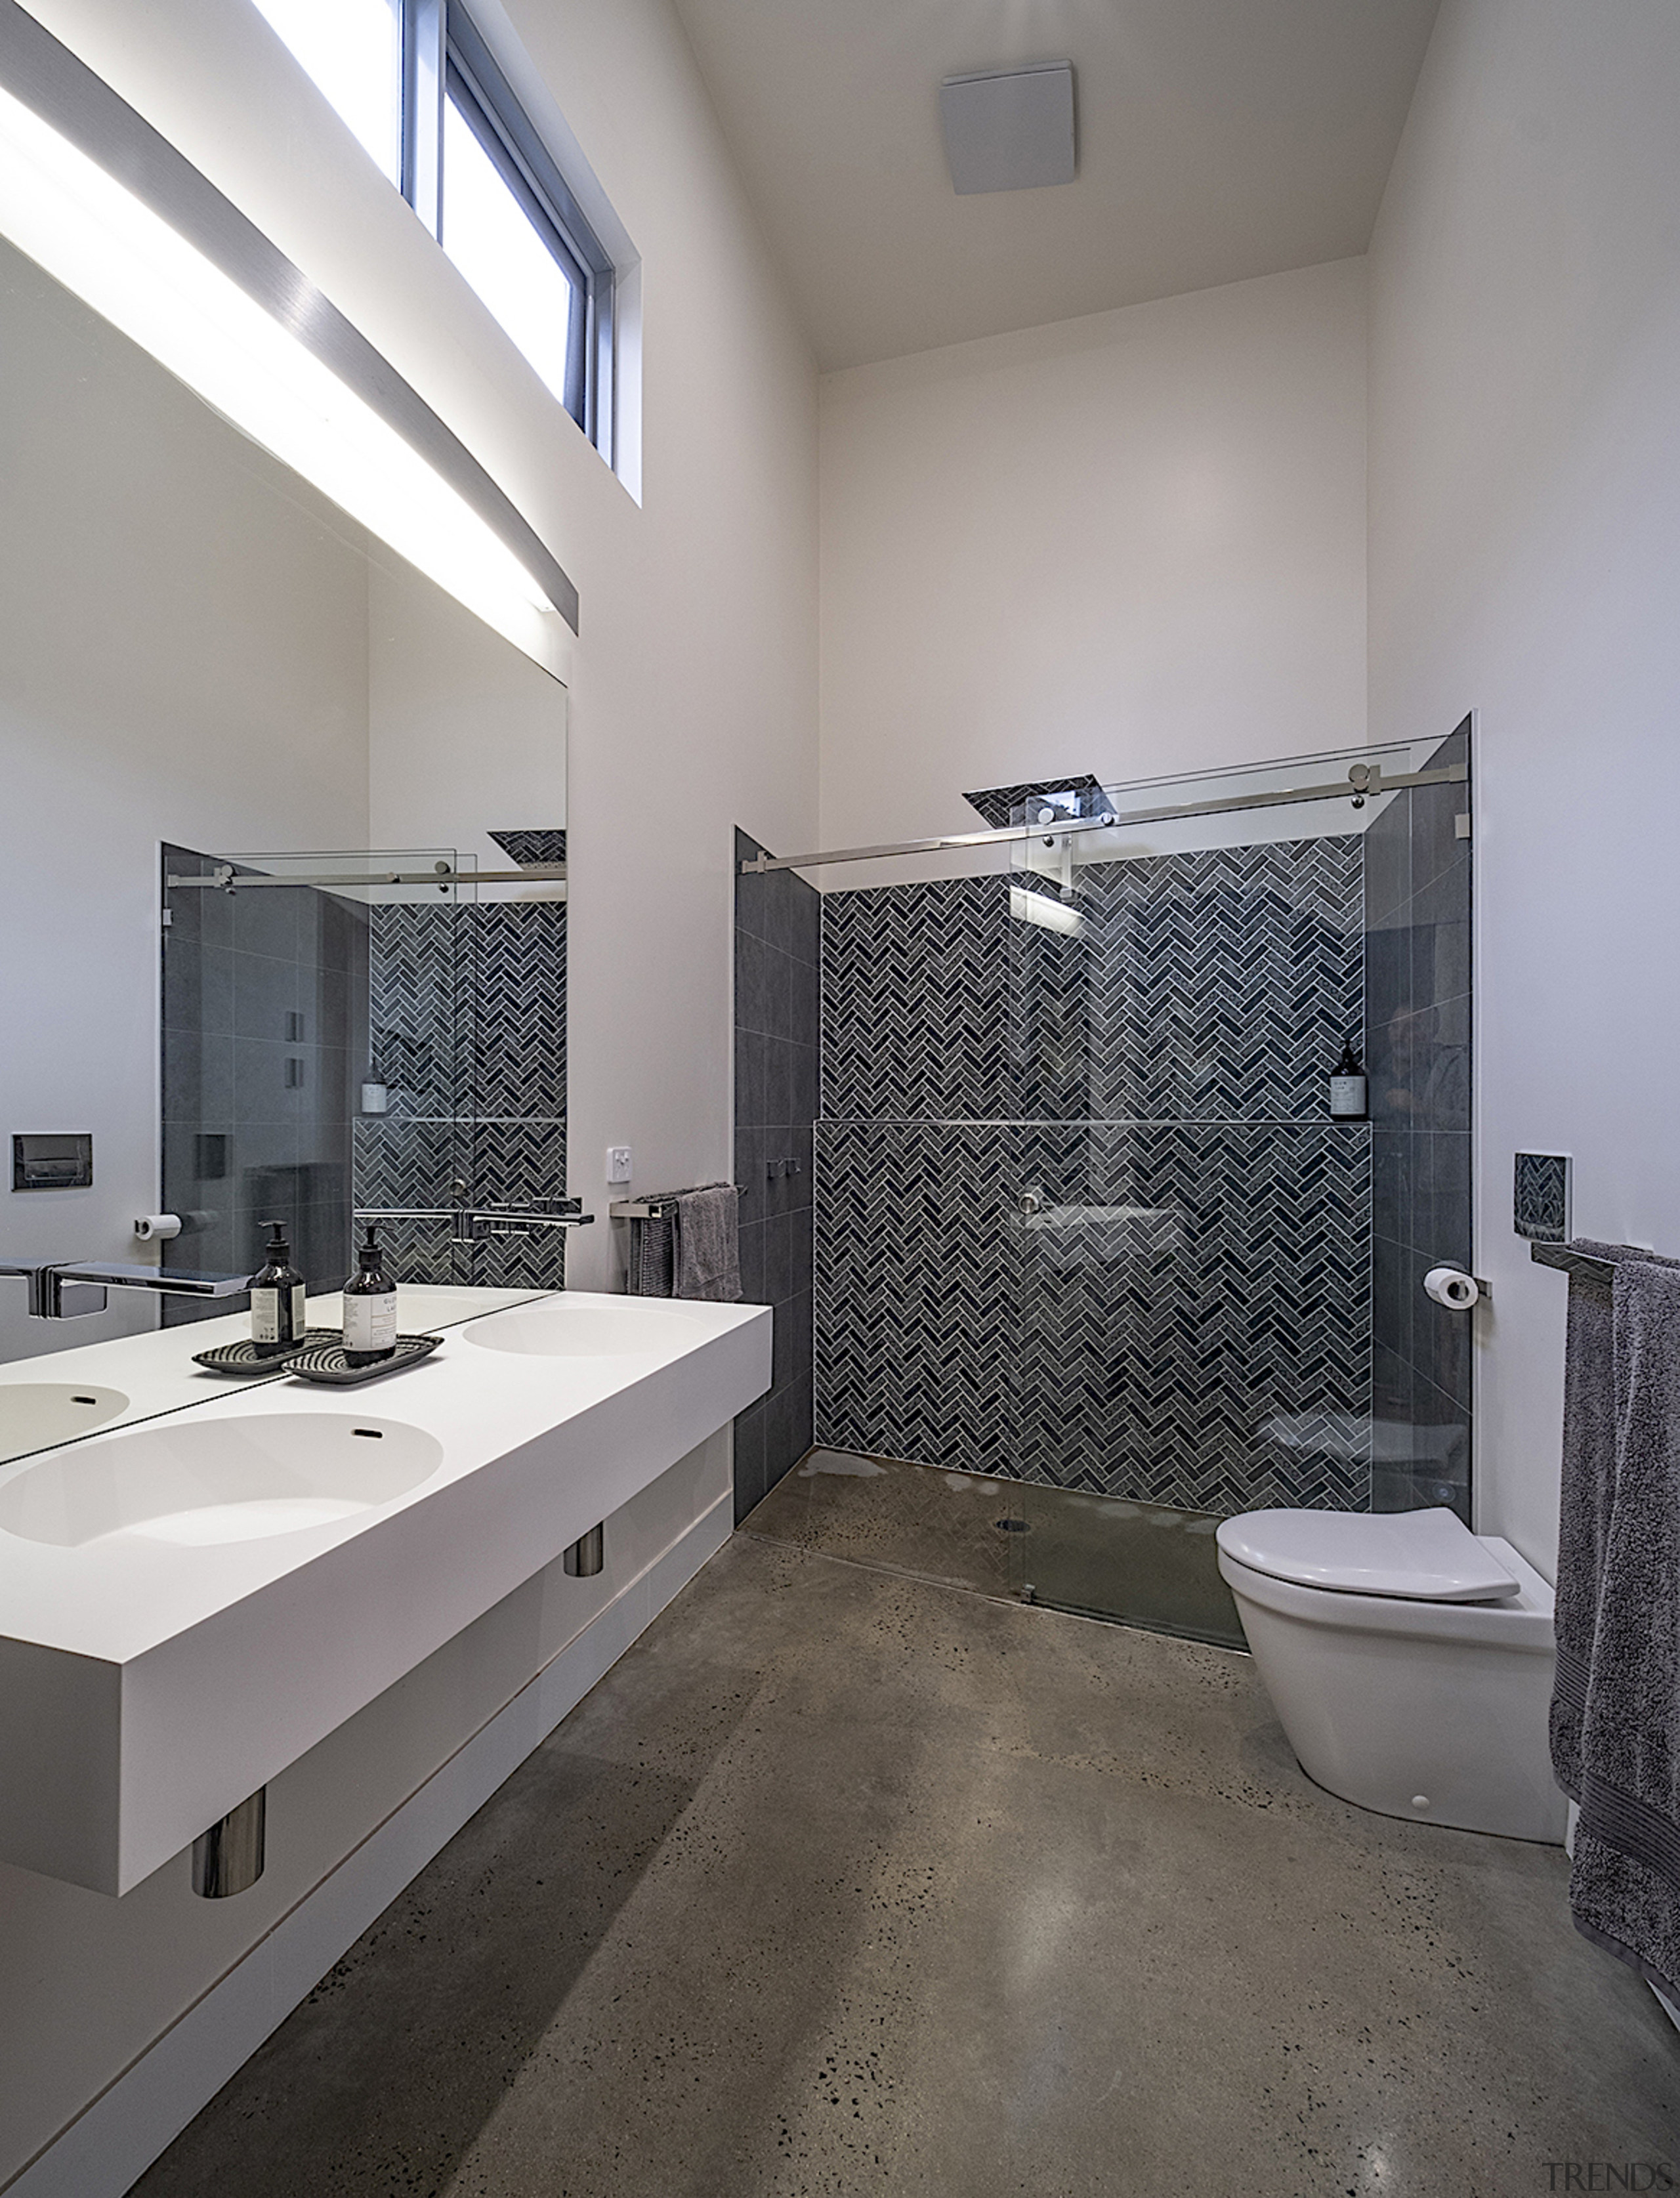 The high-ceilinged upper level master ensuite takes in 